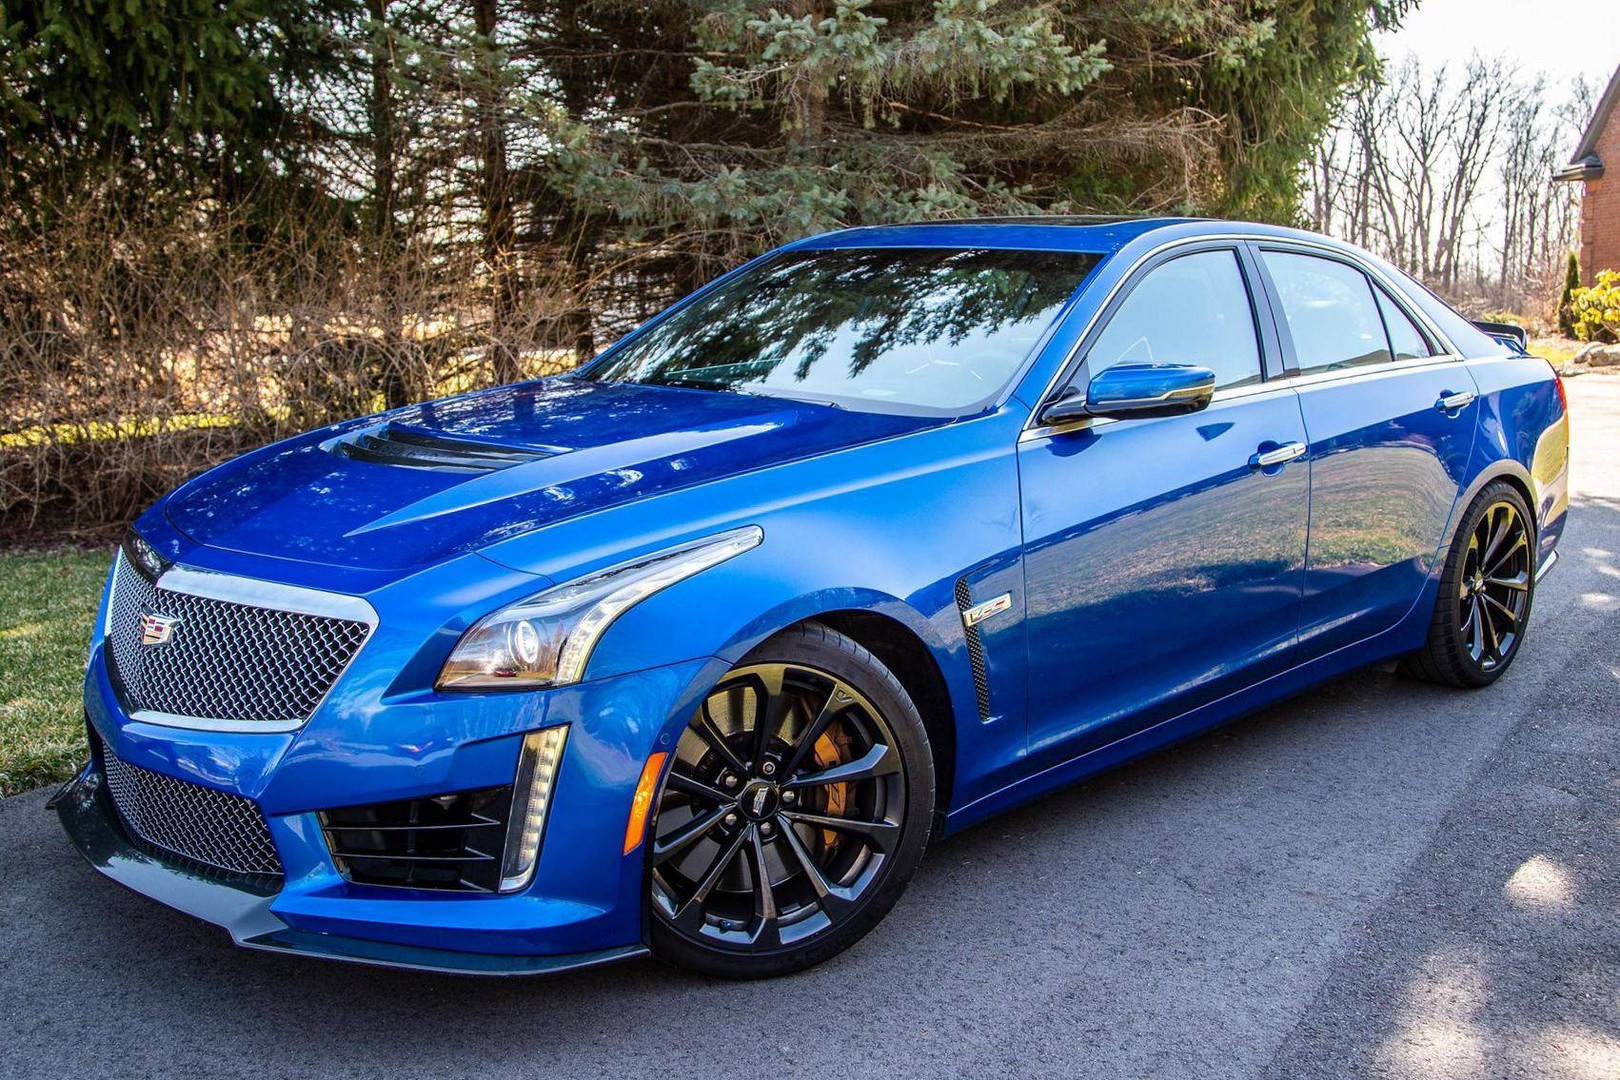 One-Owner 2018 Cadillac CTS-V Is a Supercharged 4-Door Beast With a